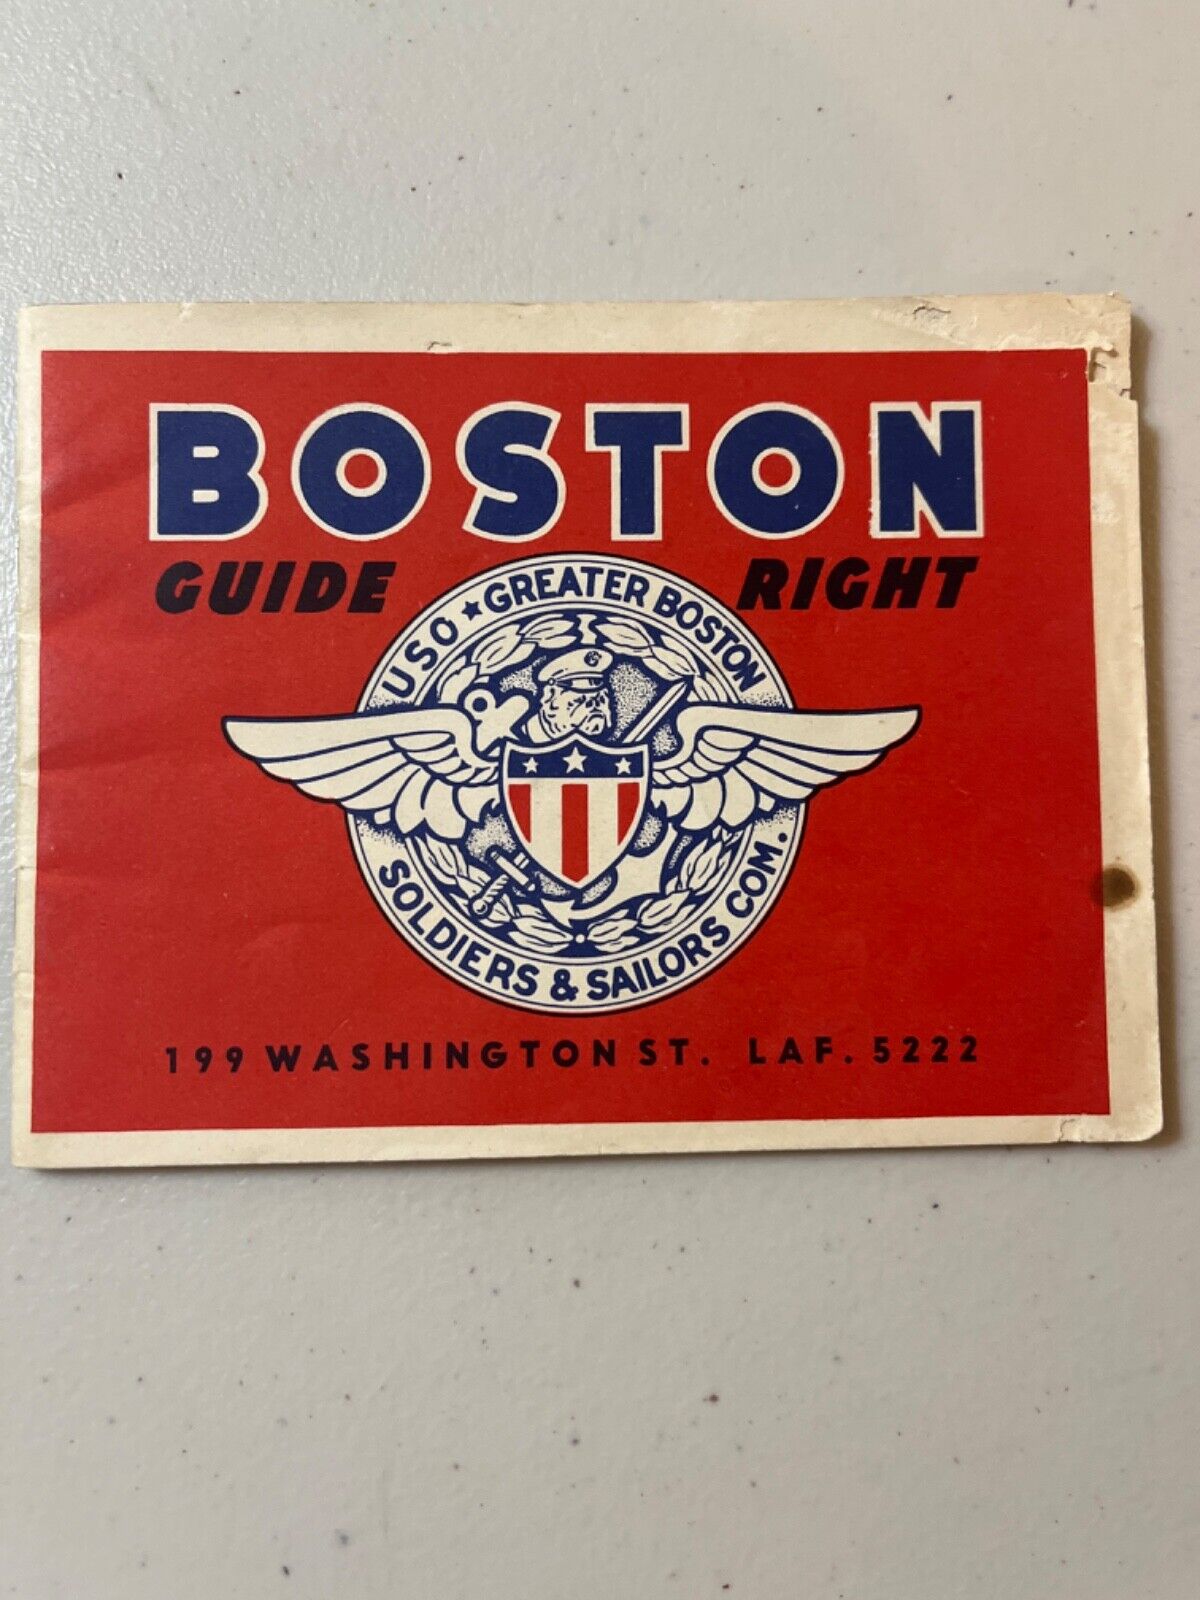 VTG 1944 BOSTON GUIDE RIGHT USO SOLDIERS & SAILORS BOOKLET MAP CLUBS SPORTS WWII